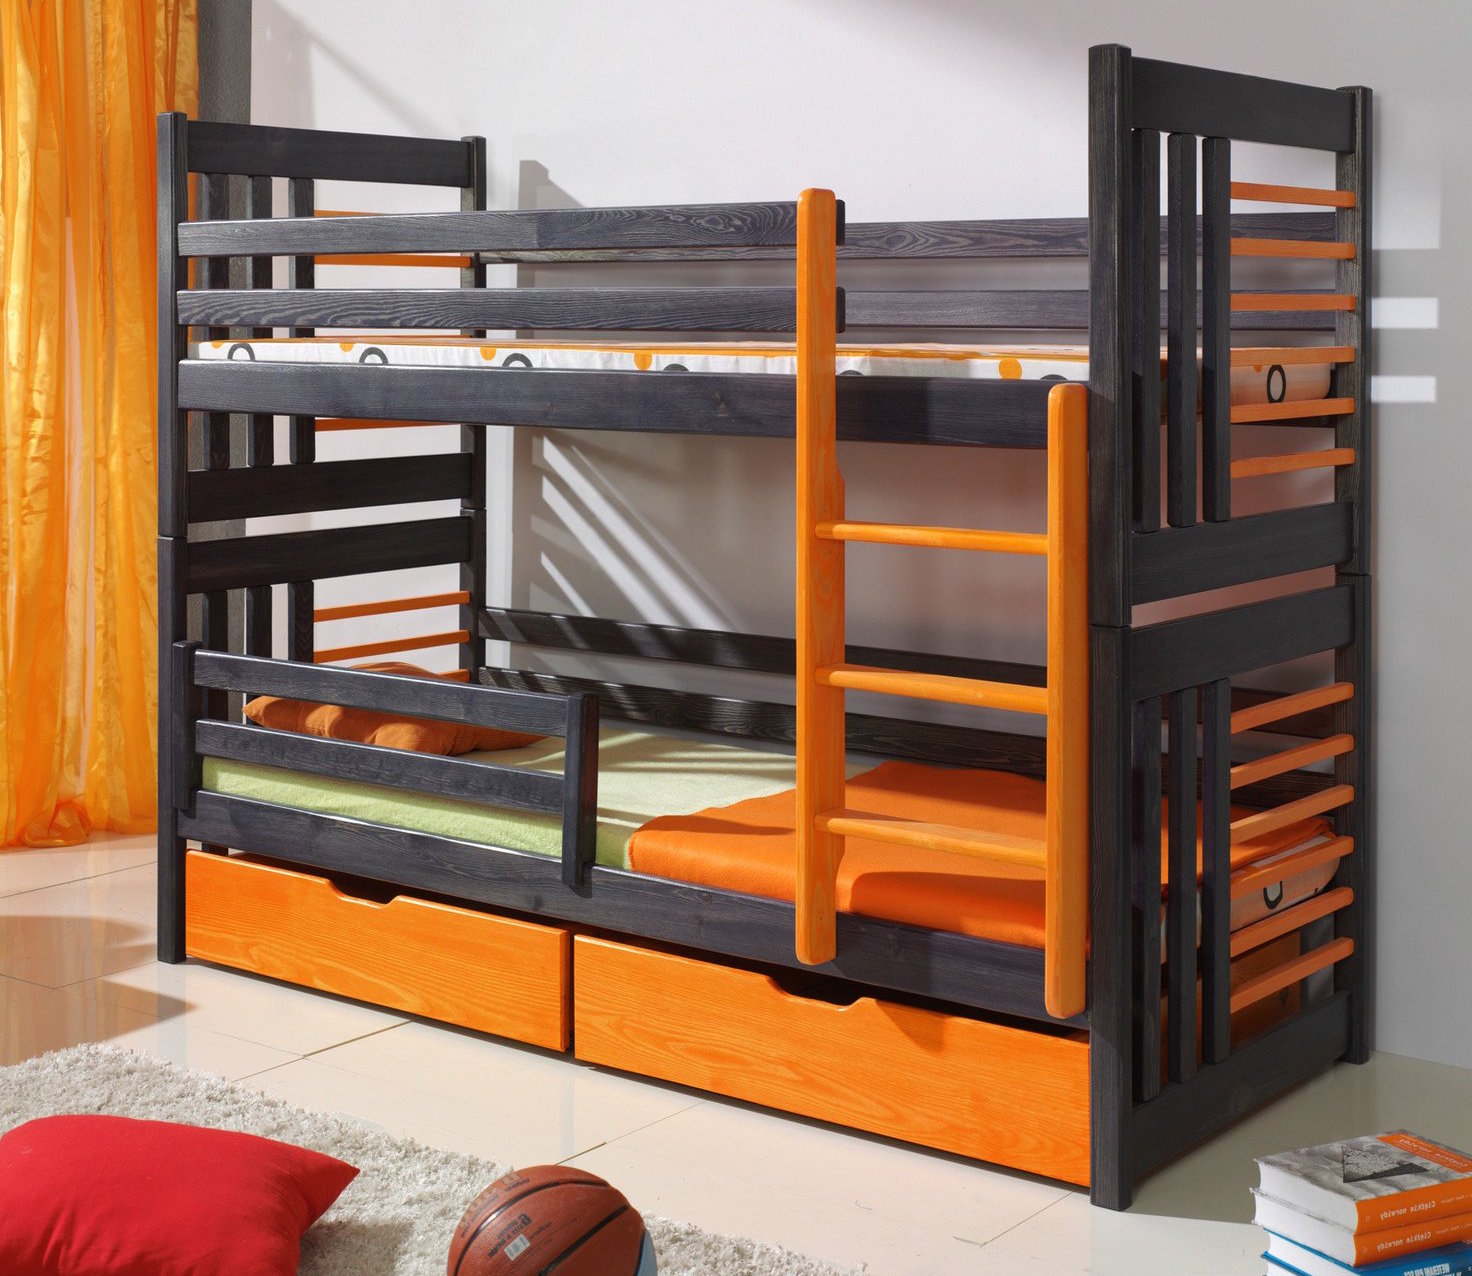 ROLAND II- Safety and well built bunk bed with drawers - Wardrobe-Bunk-Bed-Sofa 